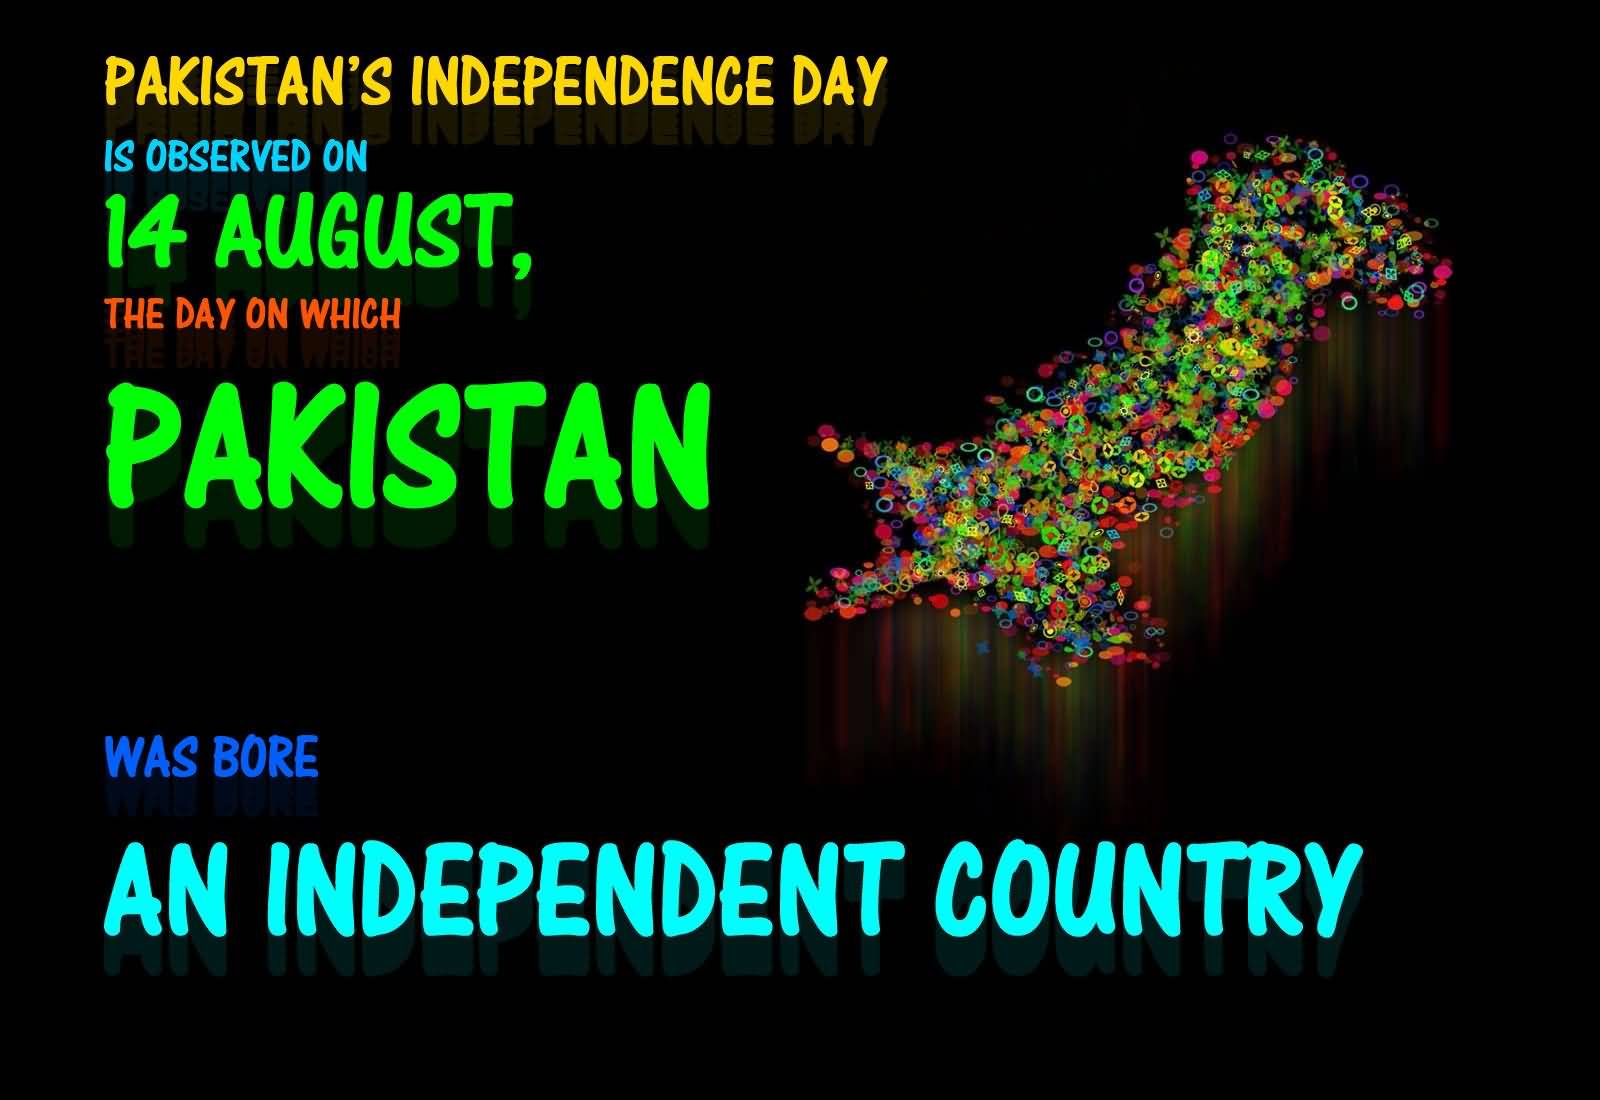 Pakistan’s Independence Day Is Observed On 14 August The Day On Which Pakistan Was Bore Independent Country